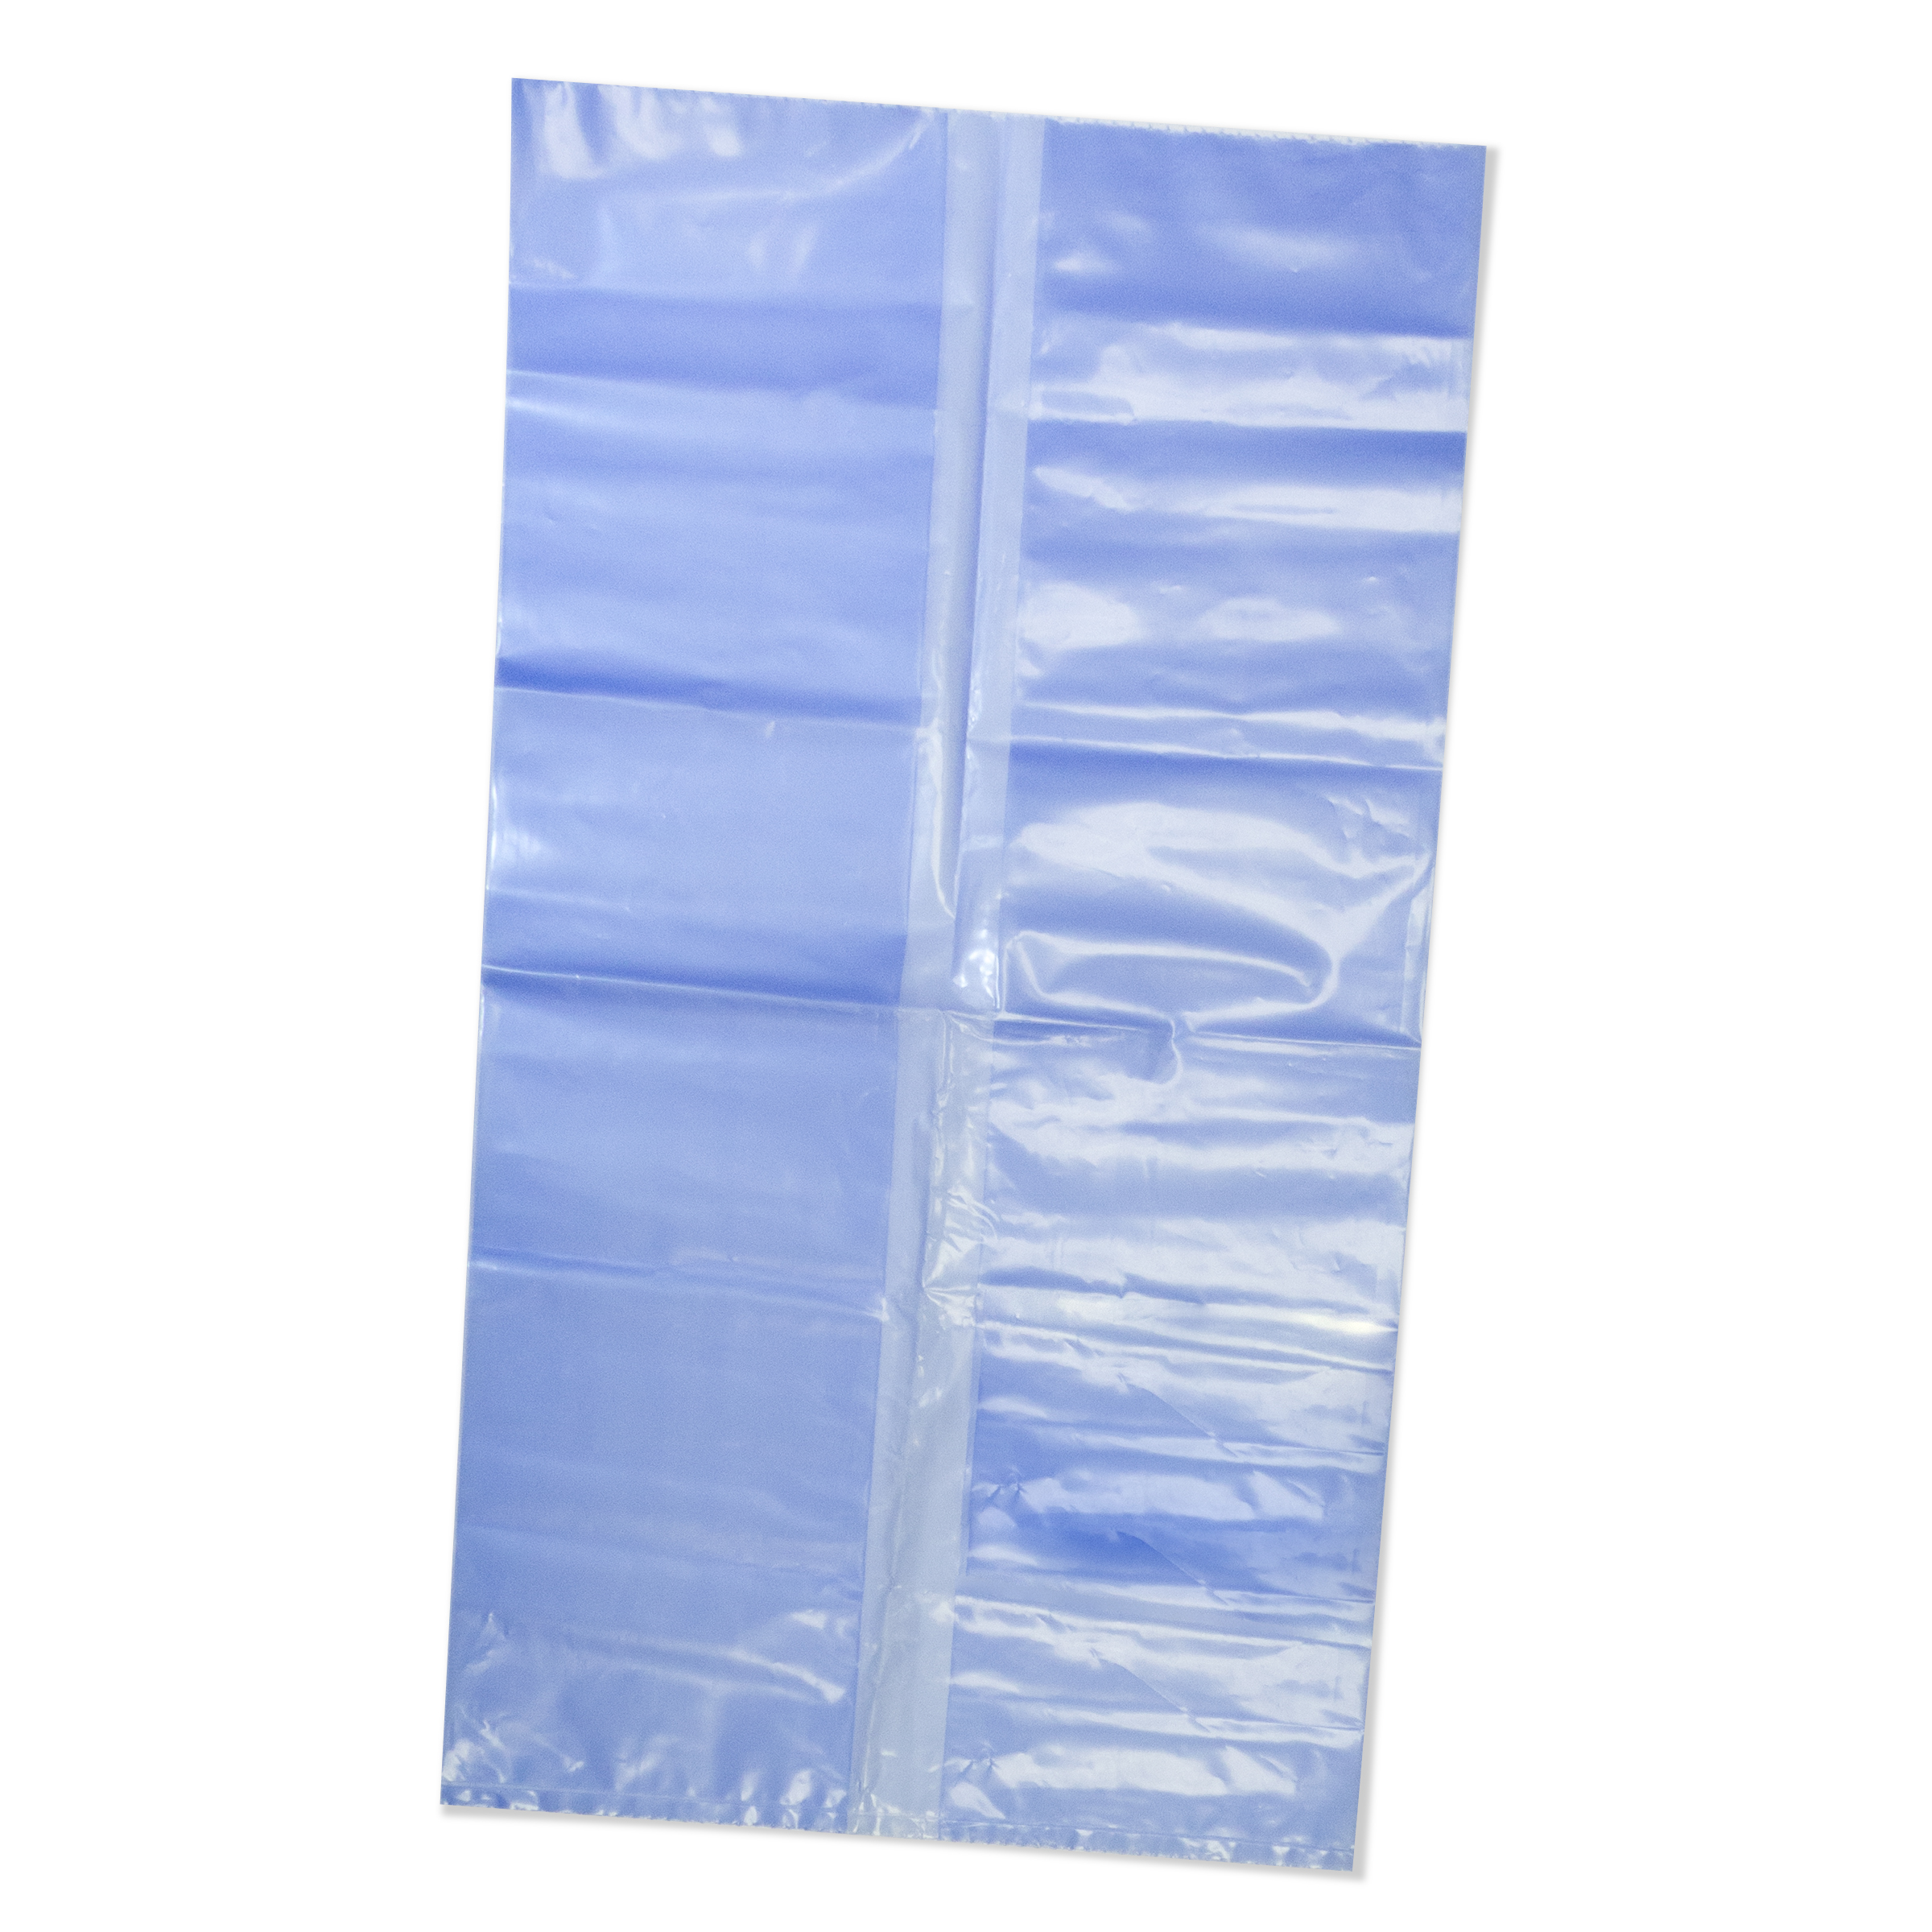 Case of 40 Bags - Armor Poly VCI Gusseted Bags - Size: 50